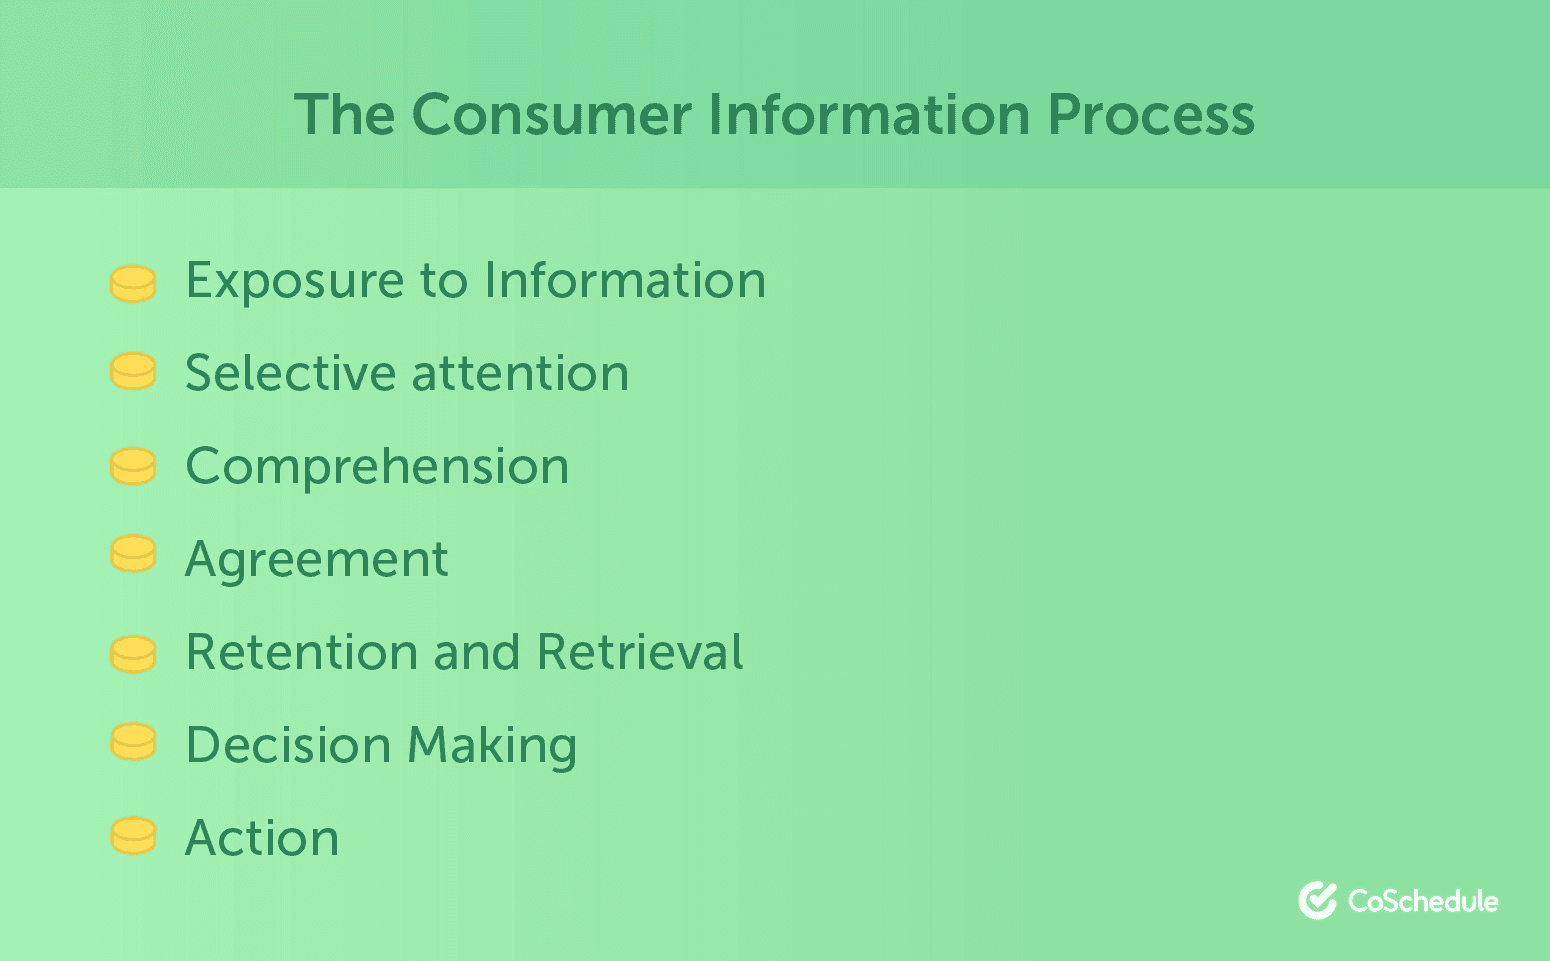 The Consumer Information Process